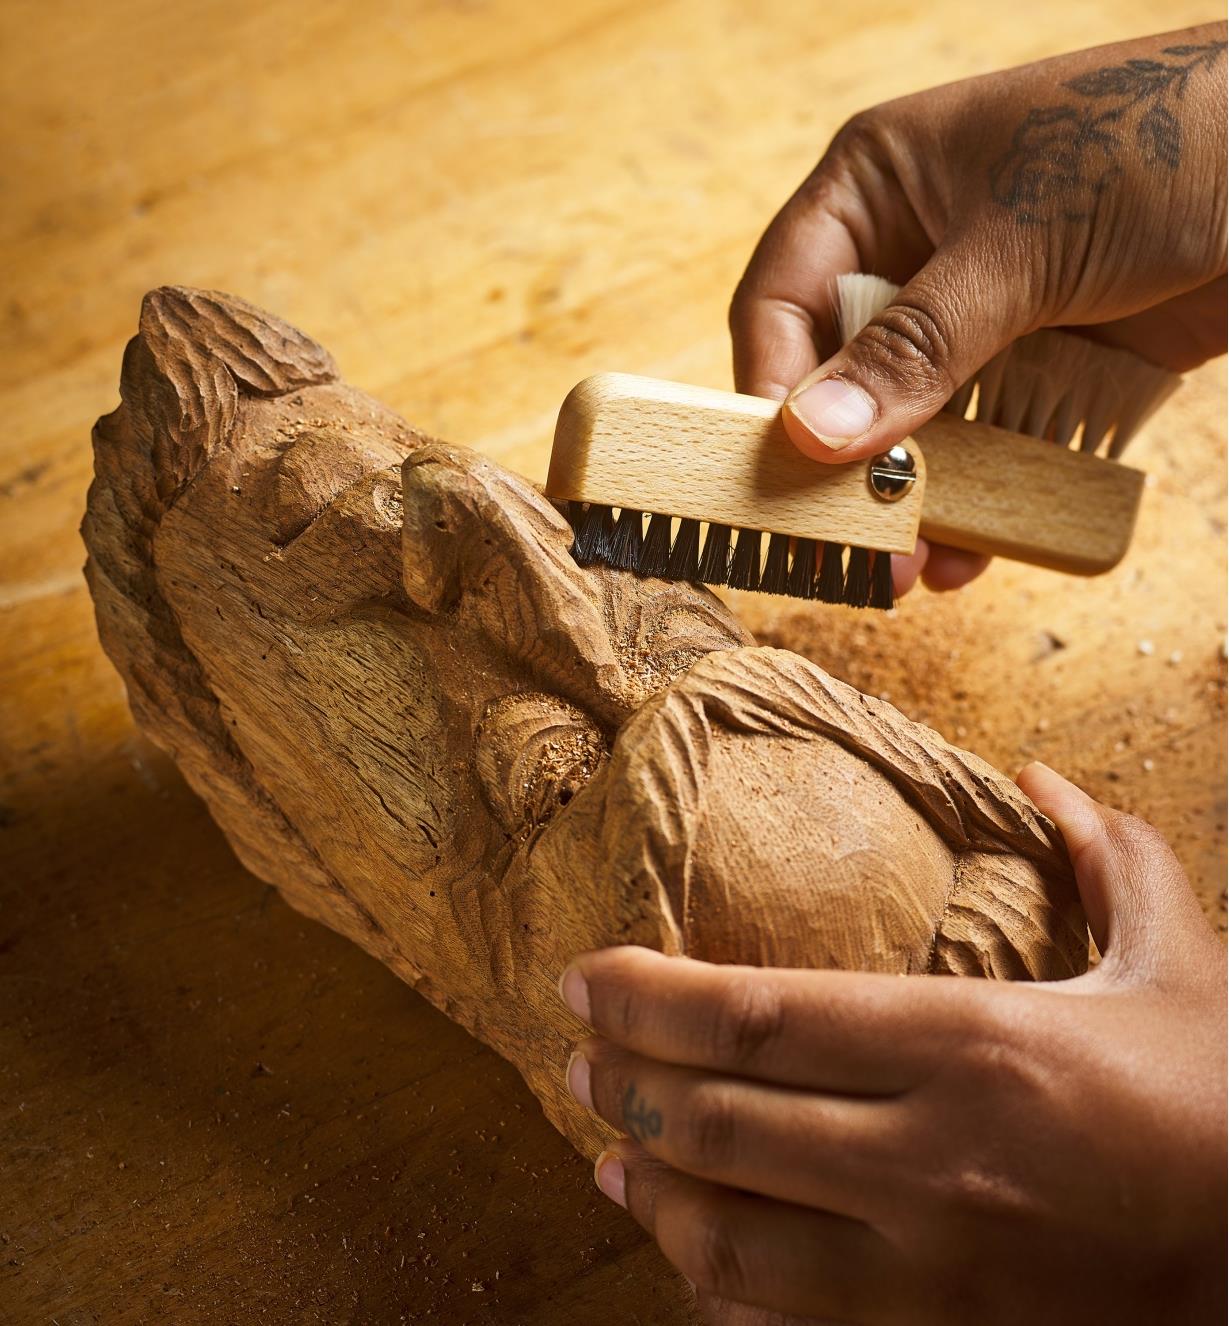 Brushing sawdust from a wood carving using the black bristles of the detail dusting brush